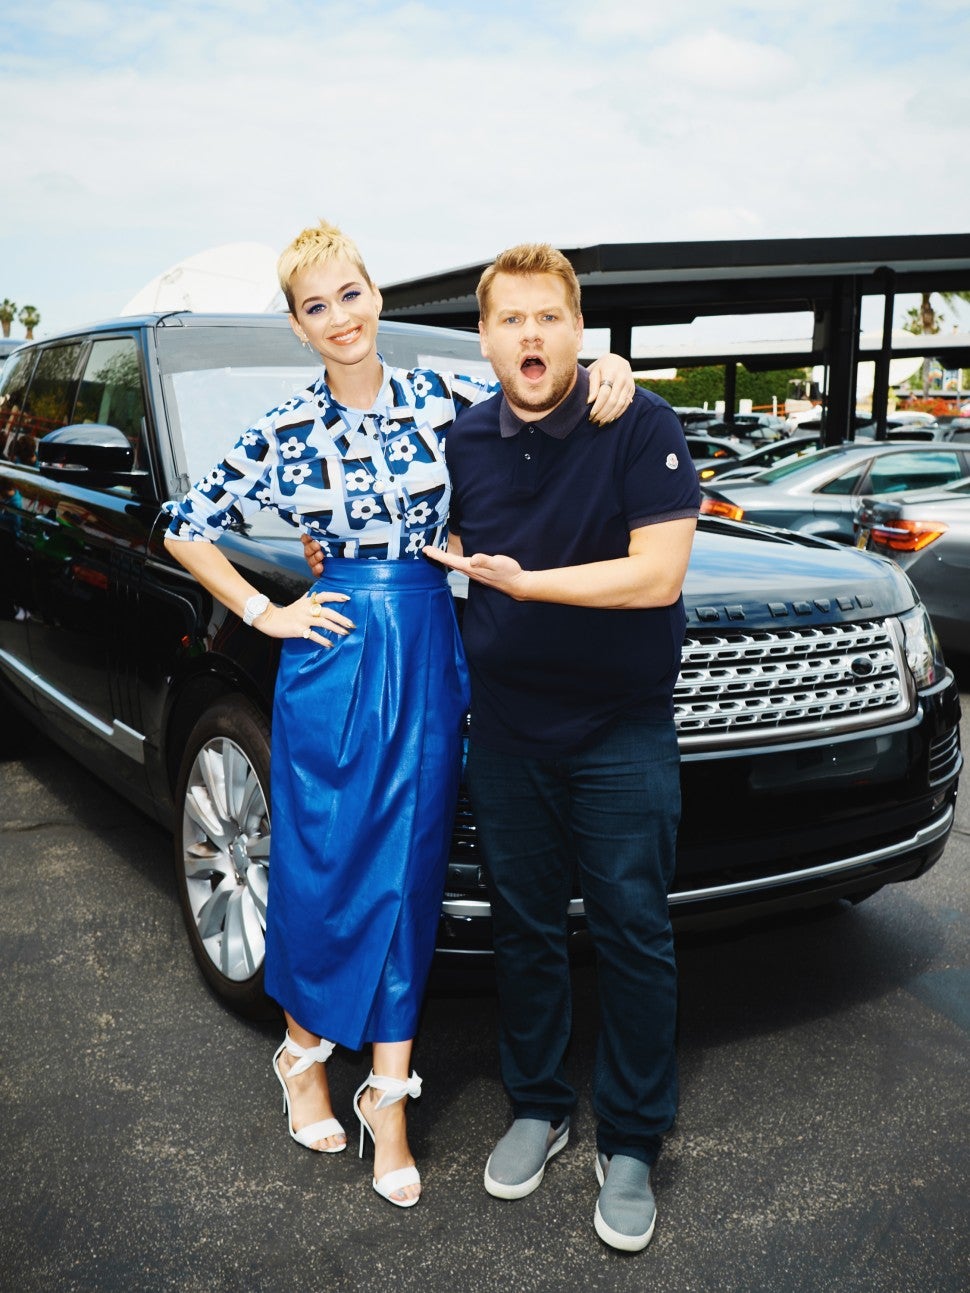 Katy Perry performs a Carpool Karaoke during "The Late Late Show with James Corden" in 2017